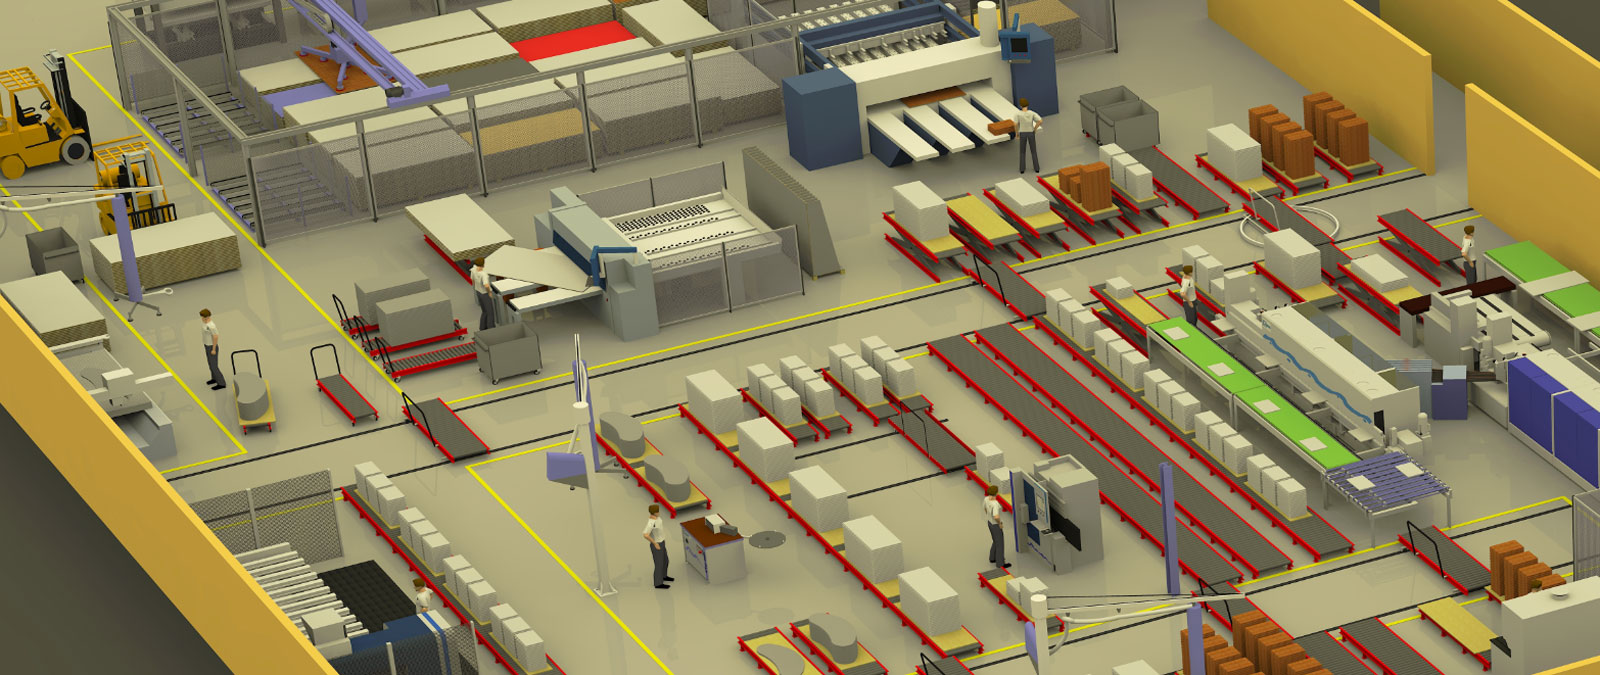 A part of the new factory layout of Nexis 3 in a 3D view